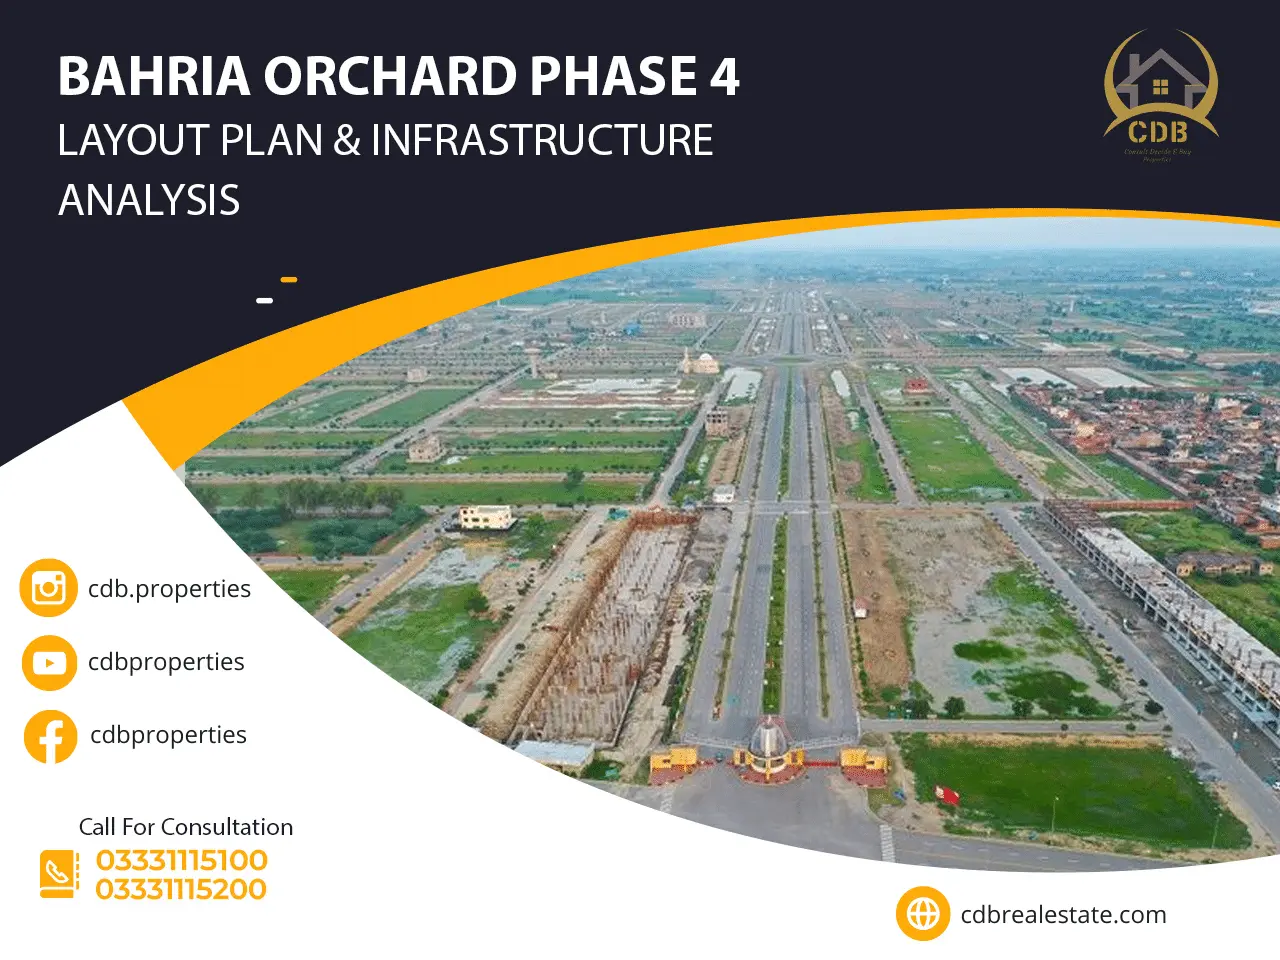 Bahria Orchard Phase 4 Layout Plan & Infrastructure